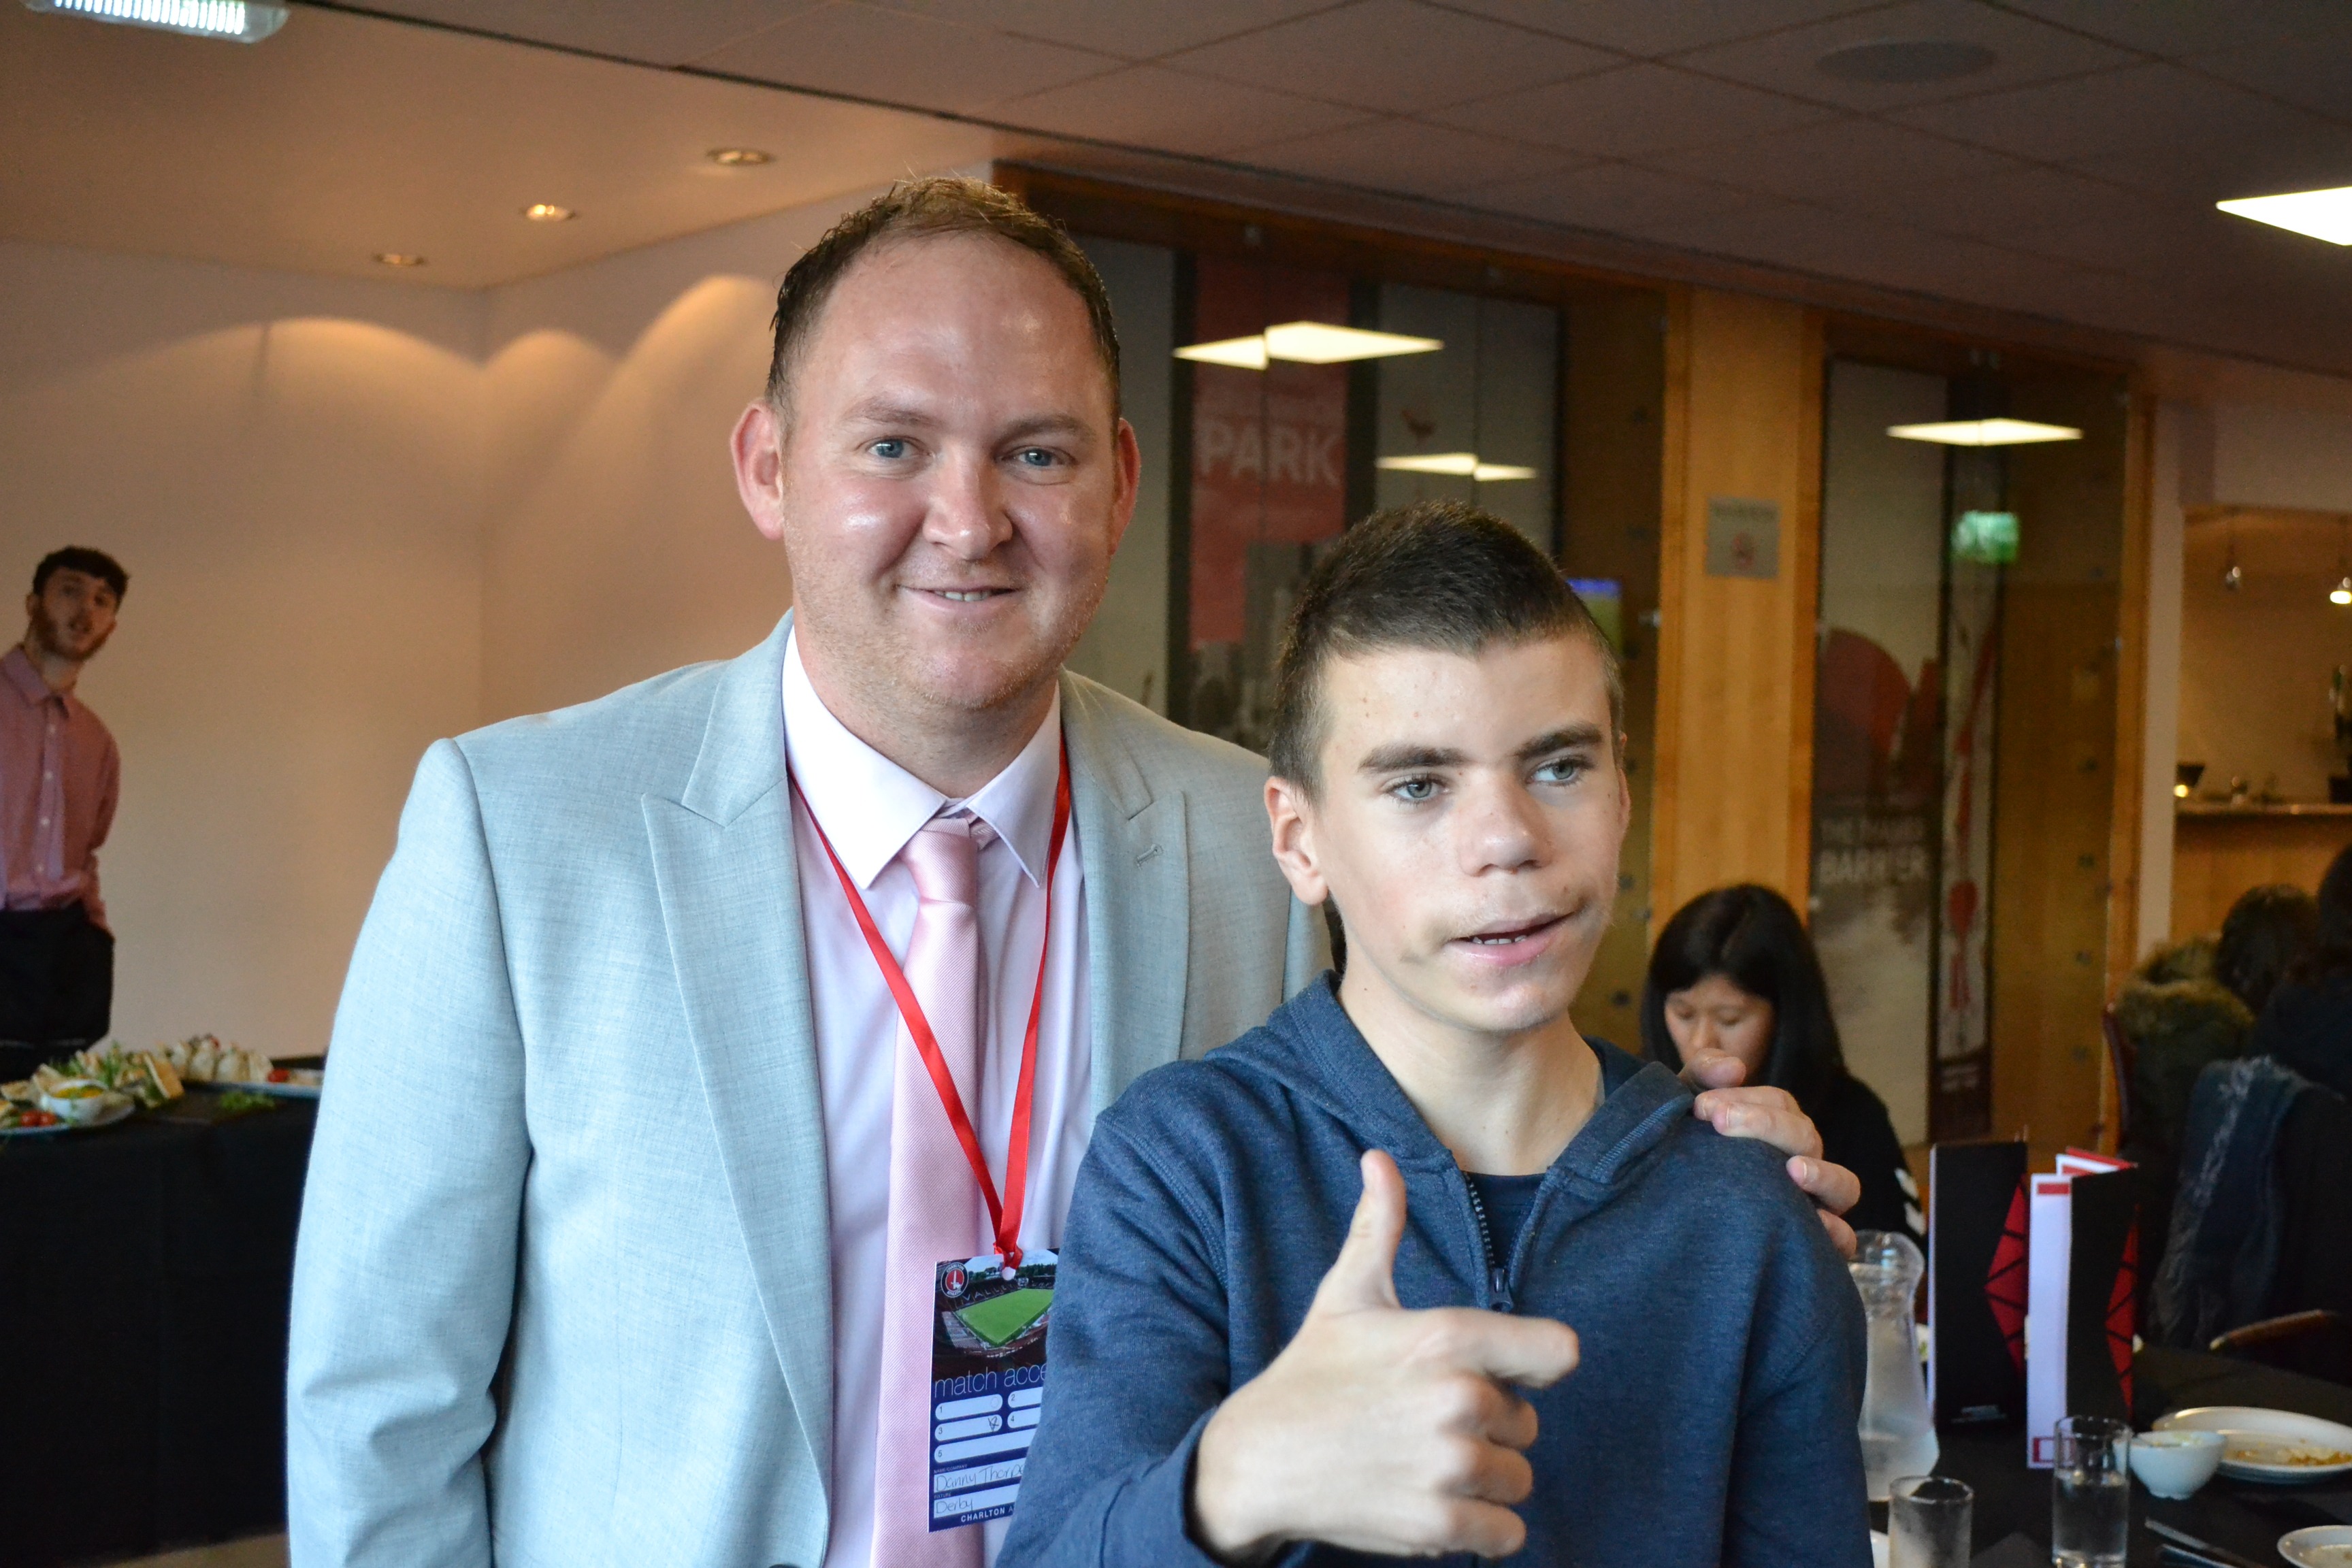 Image of Robbie with Cllr Danny Thorpe